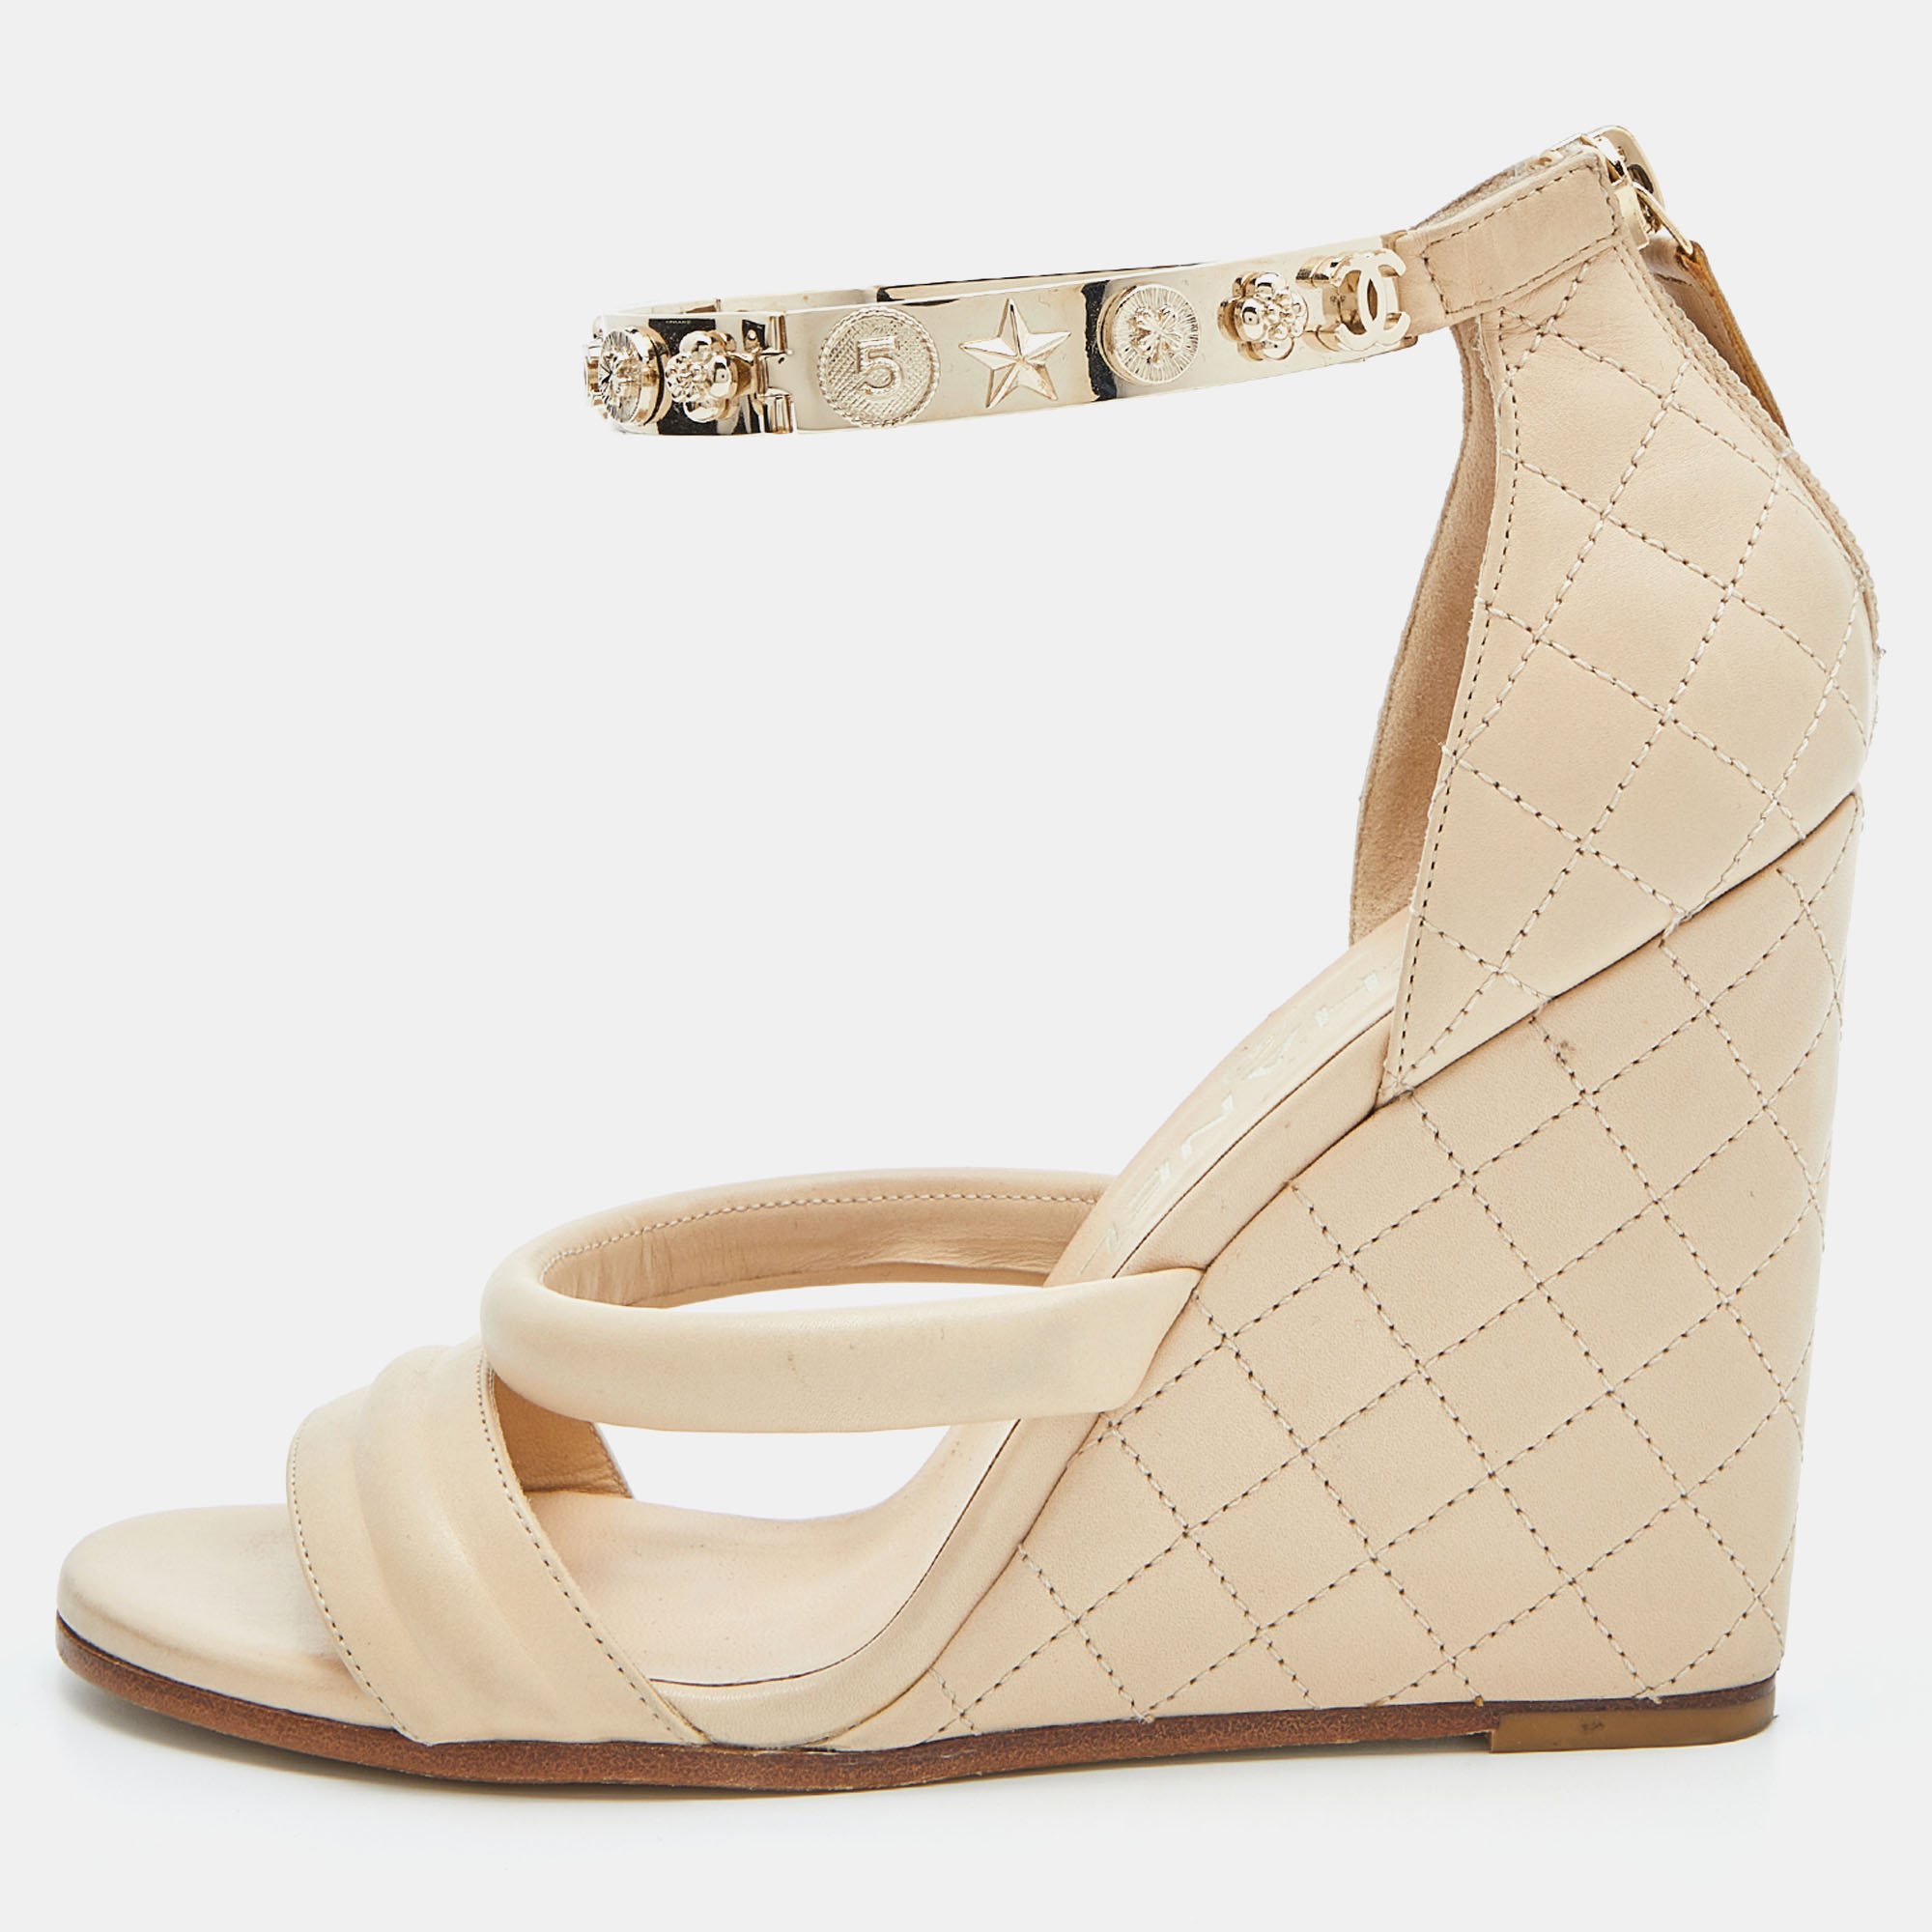 Chanel Beige CC Quilted Ankle Bracelet Wedge Sandal 37 – The Closet